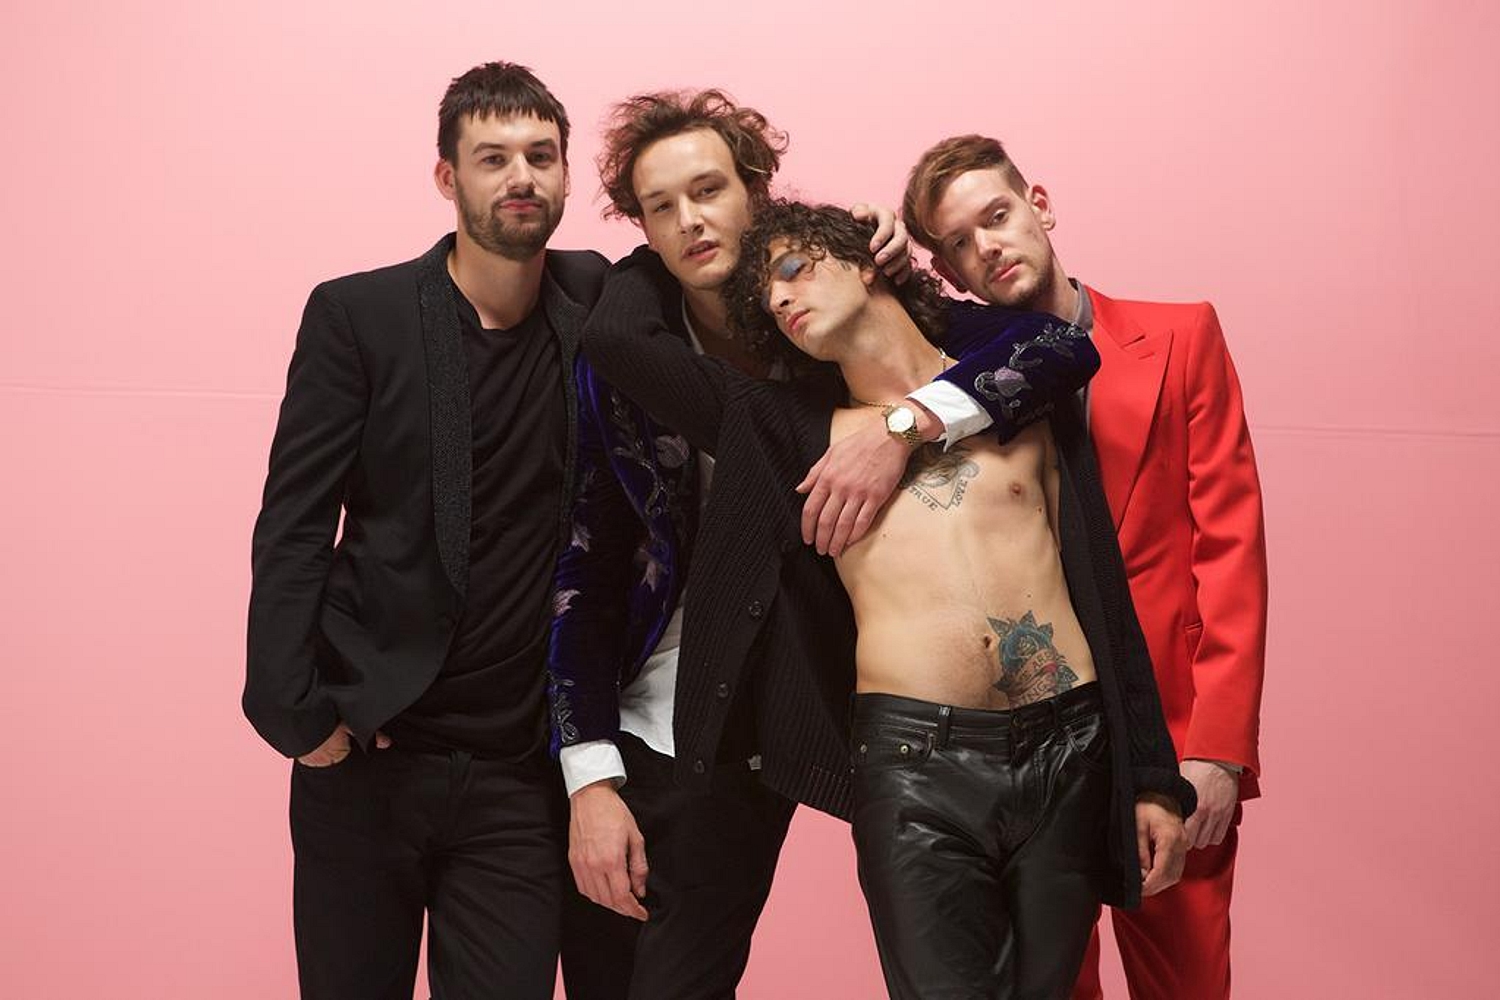 Tracks: The 1975, Run the Jewels, and more